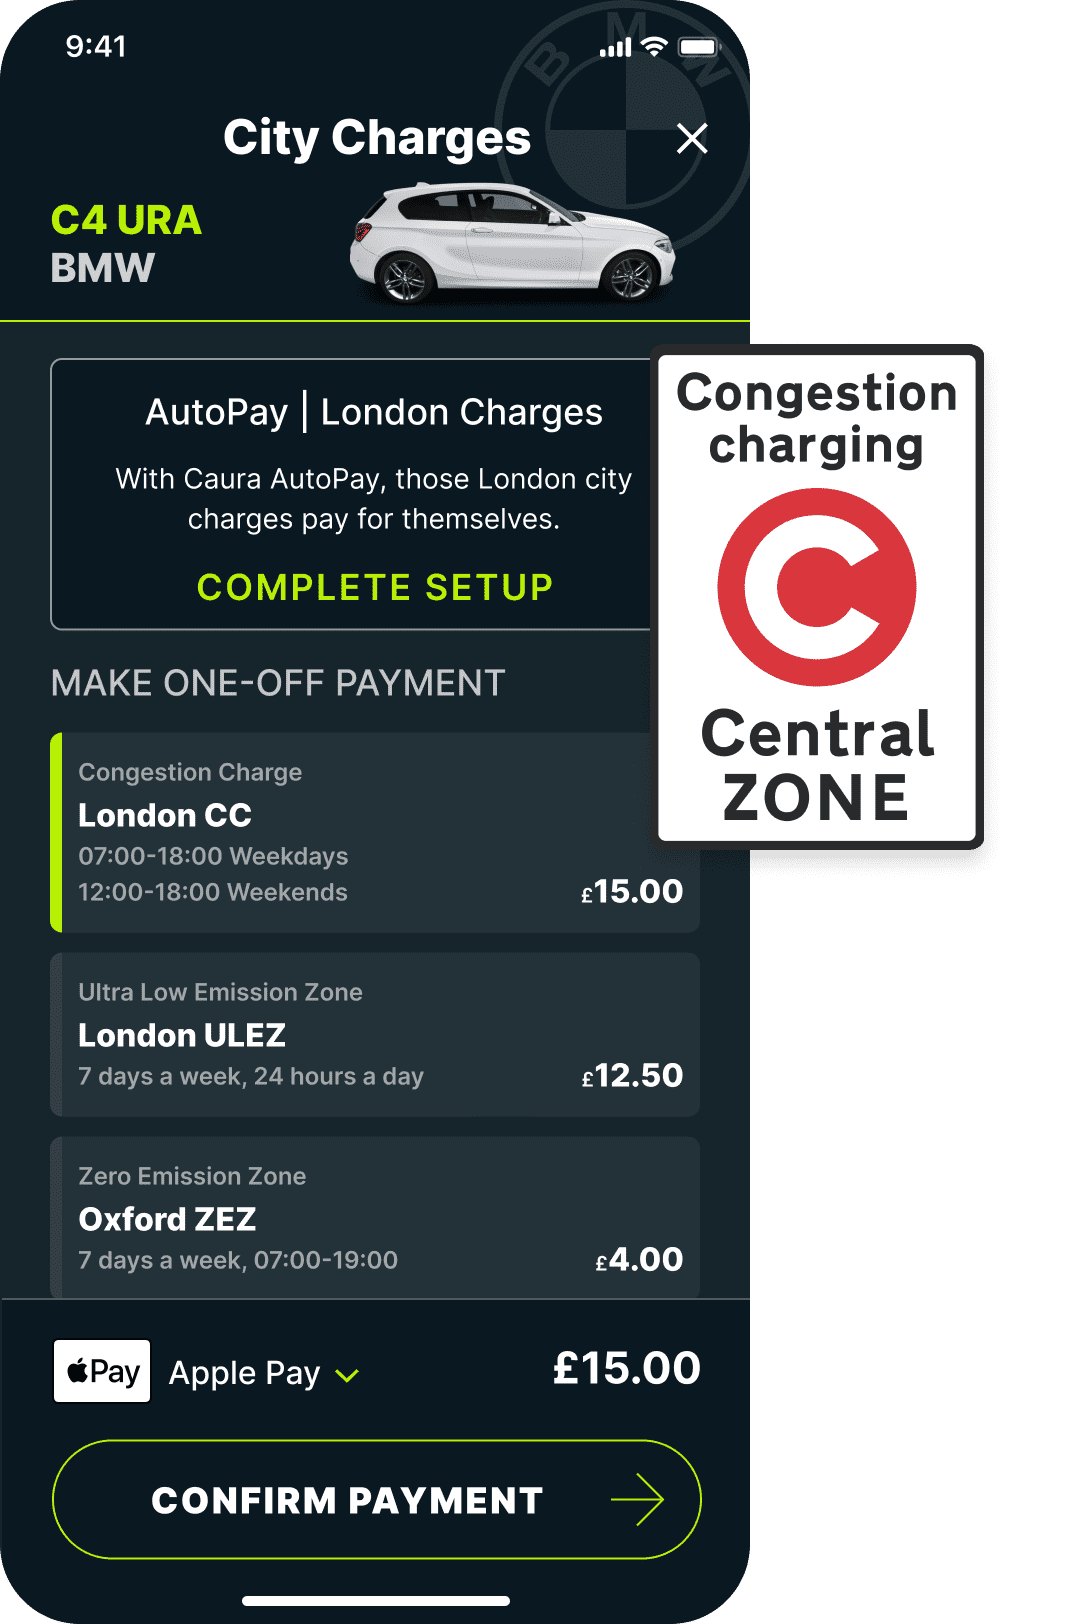 Congestion Charge in the Caura app with Congestion charge road sign